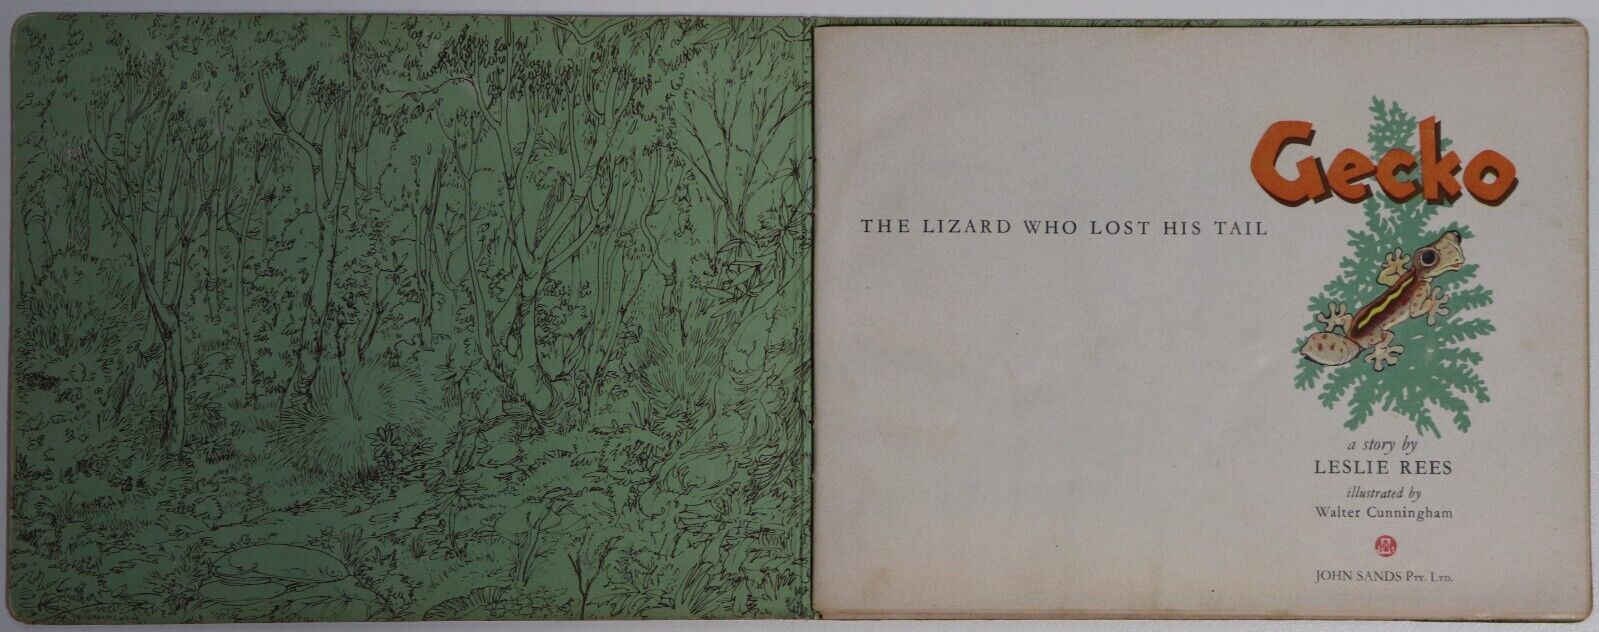 Gecko: The Lizard Who Lost His Tail - 1944 - Antique Children's Book - 0